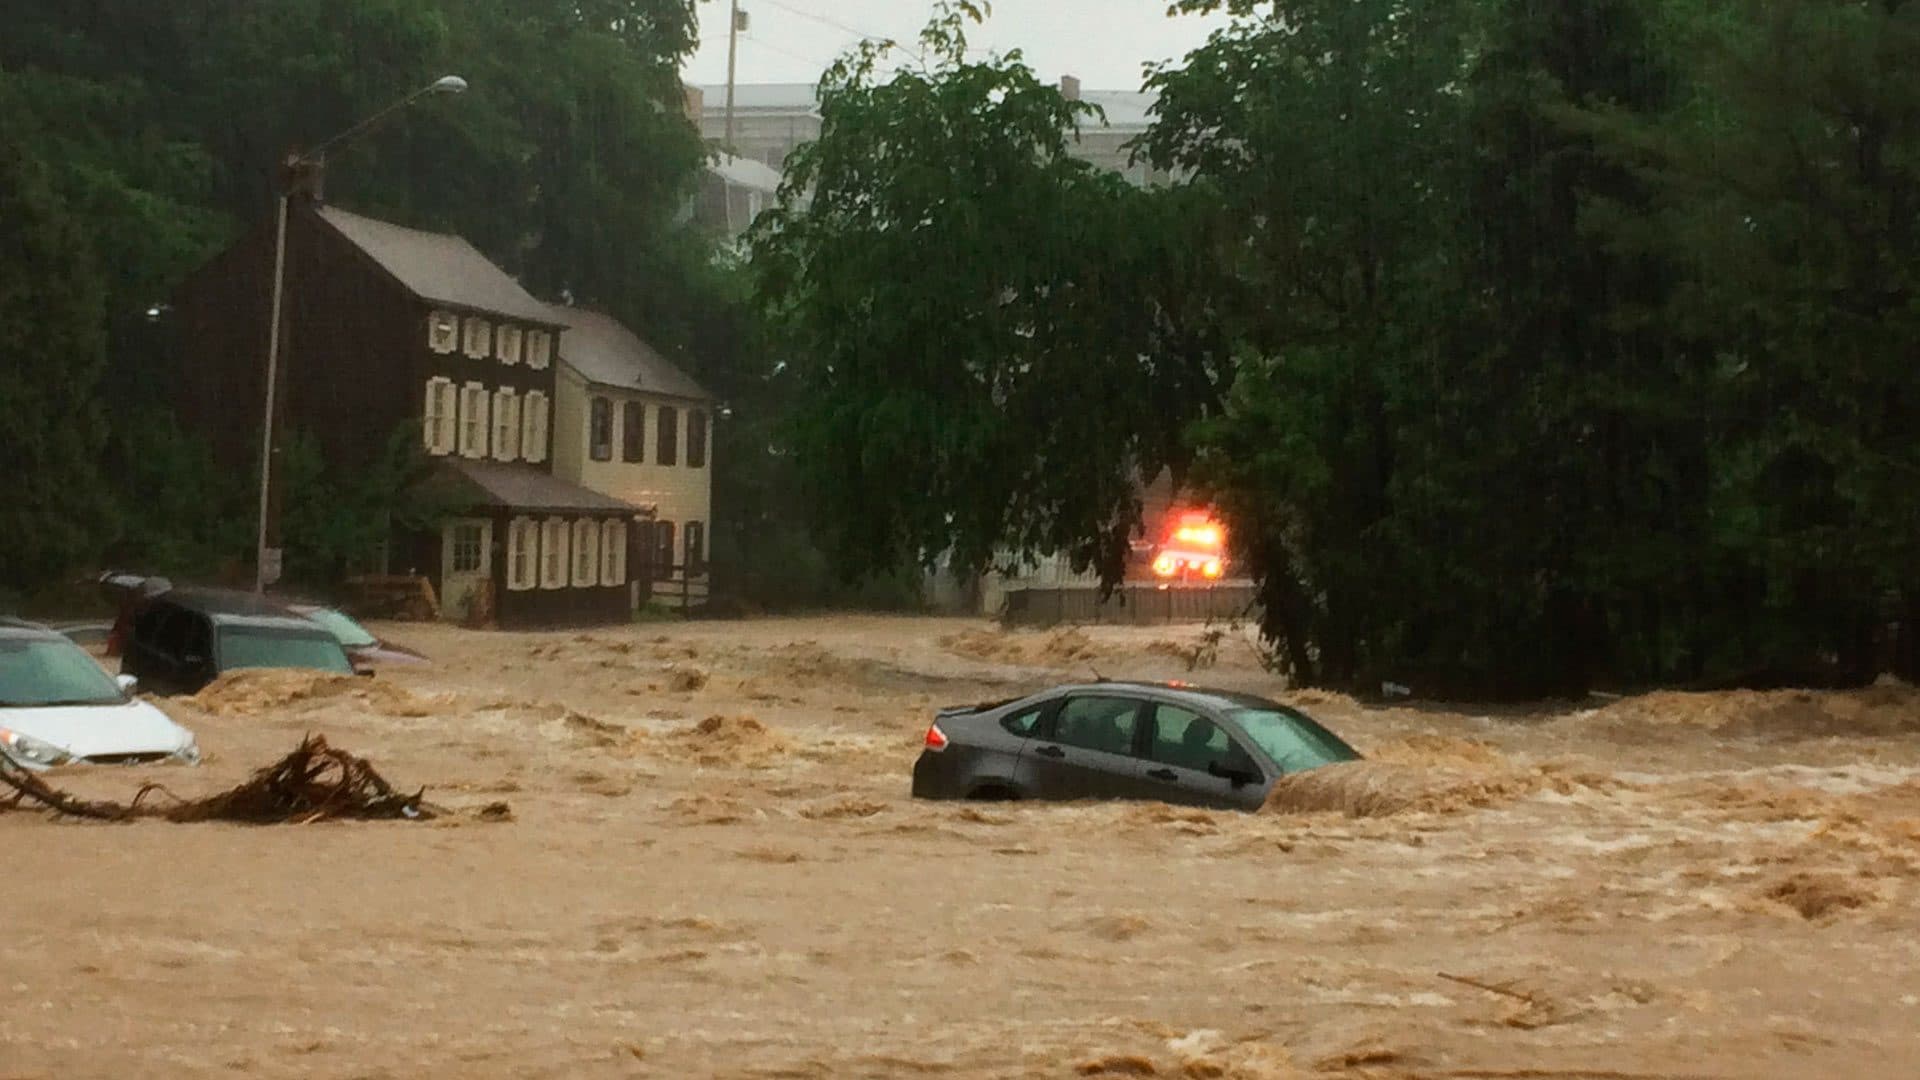 Water rushes through Main Street in Ellicott City, Md.